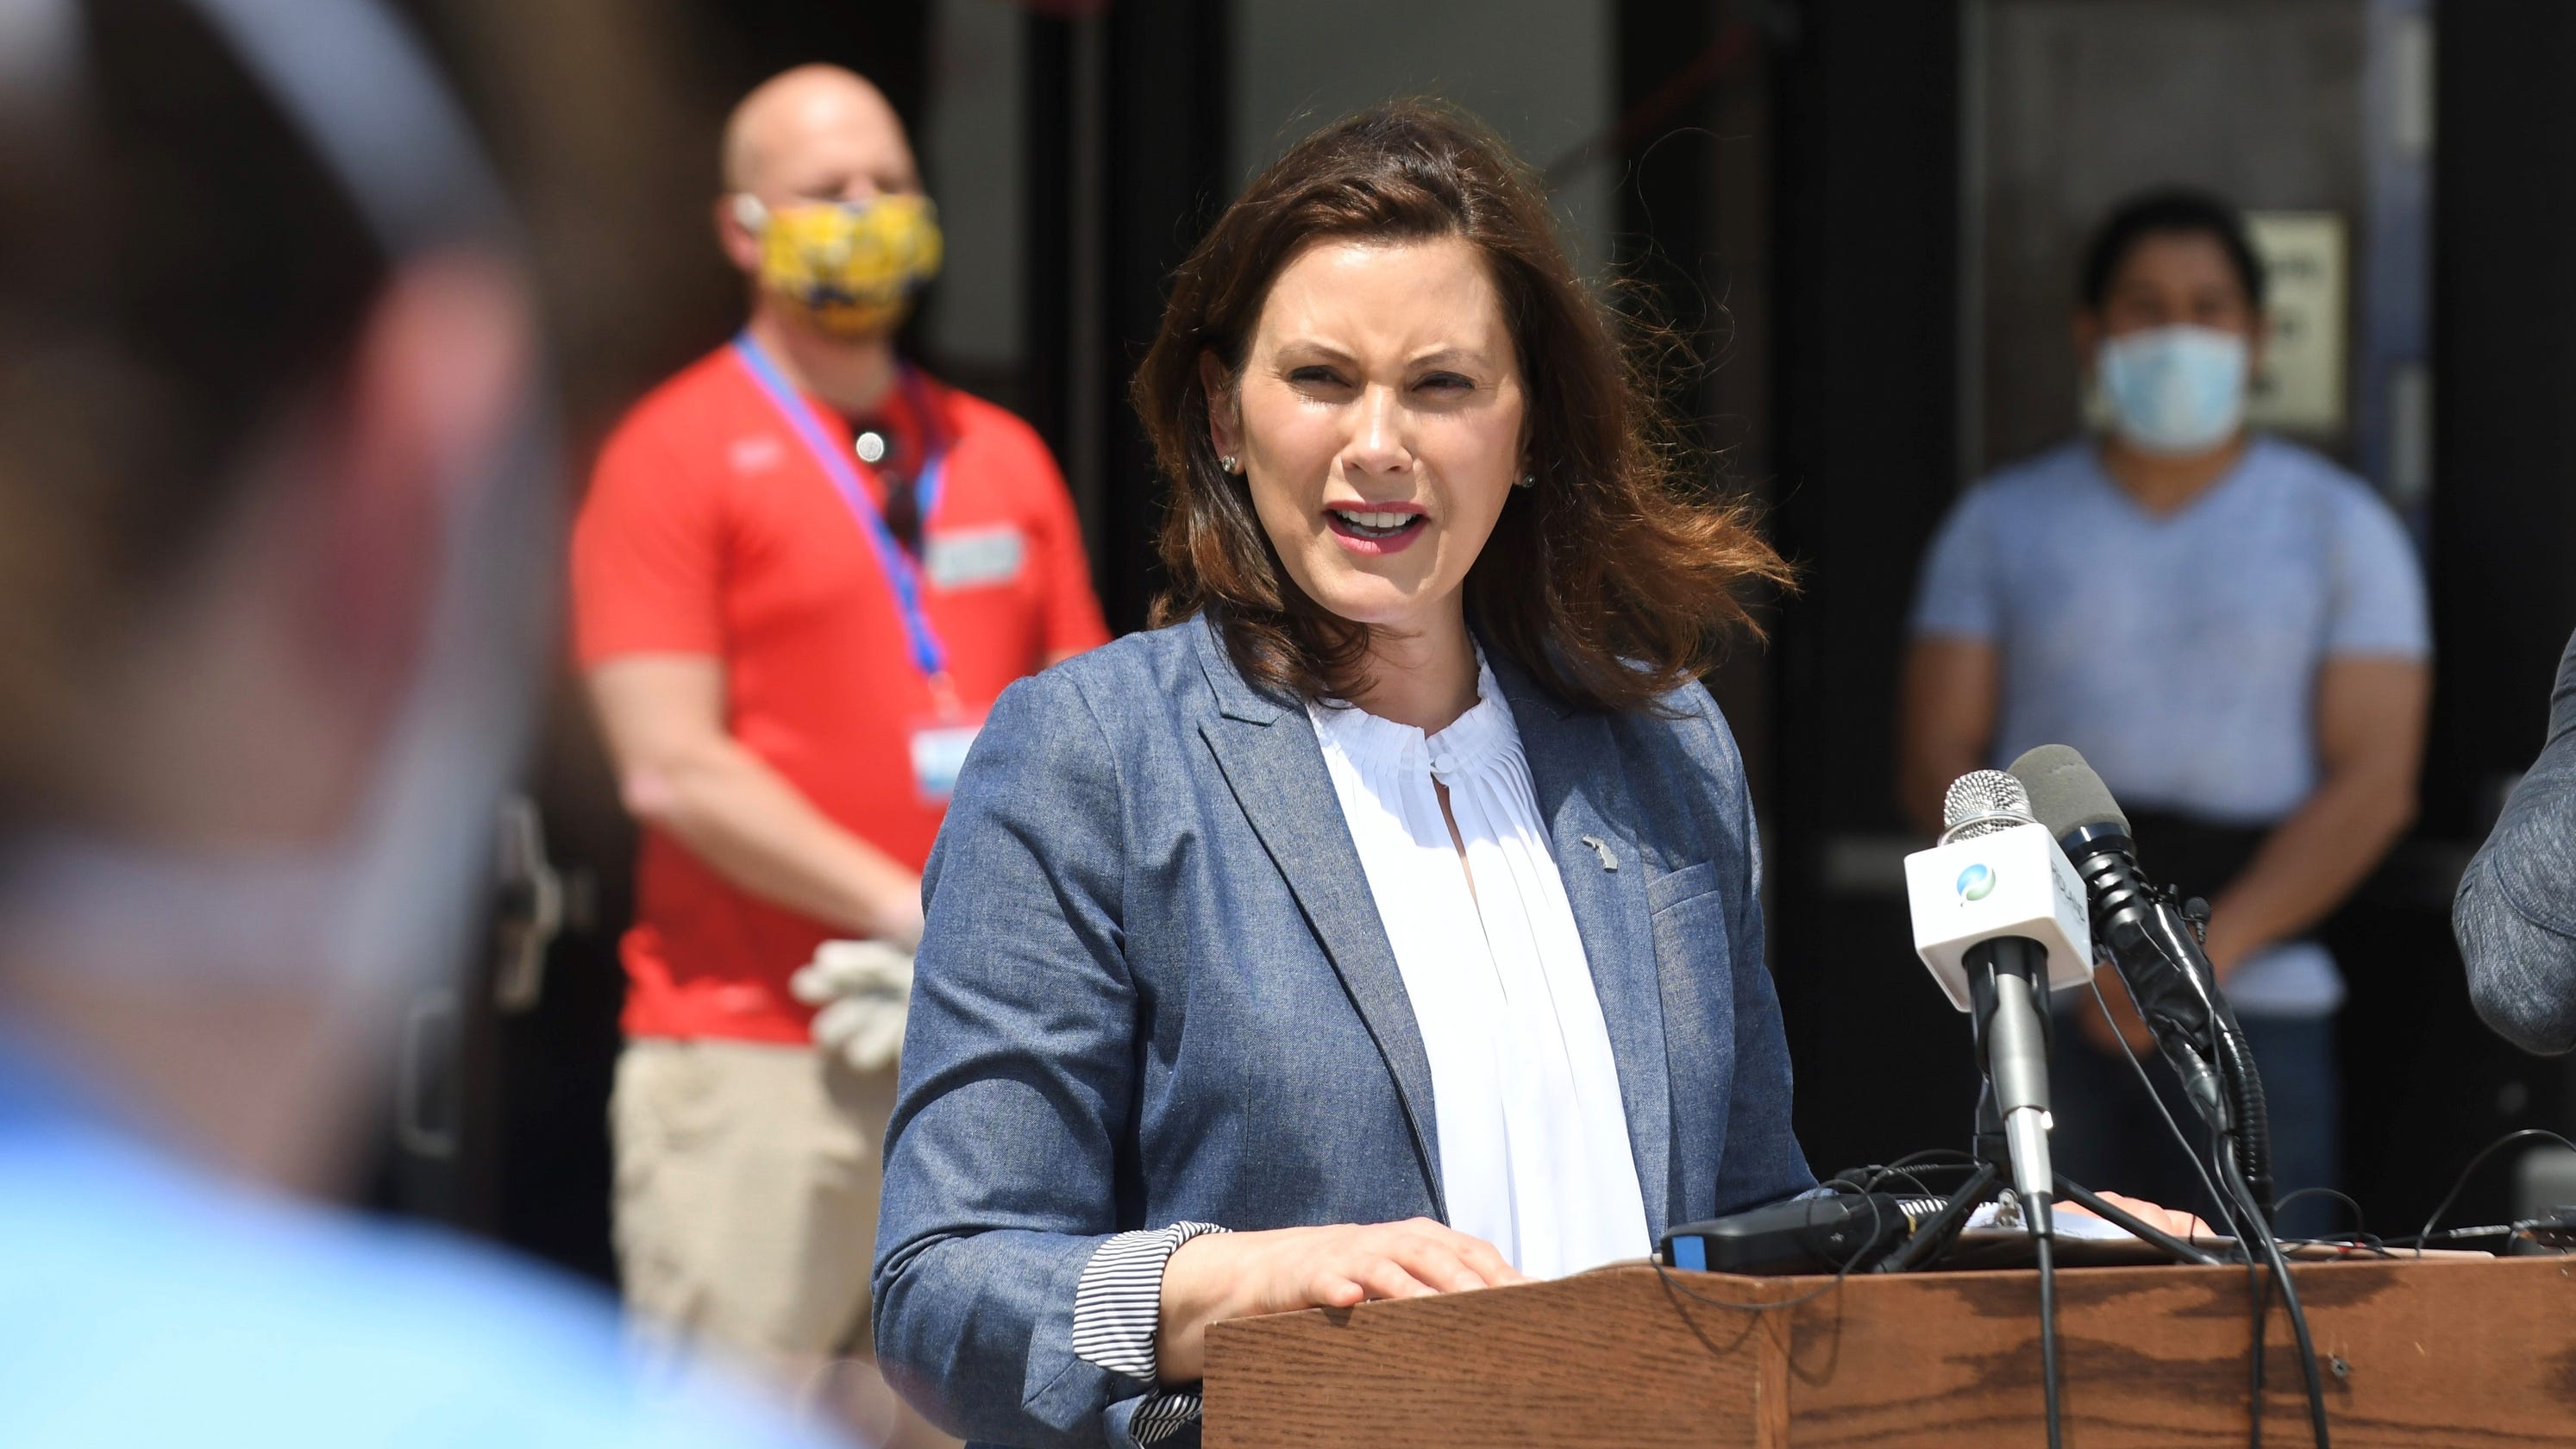 Whitmer launches probe into Midland dam failures, defends agency - The Detroit News